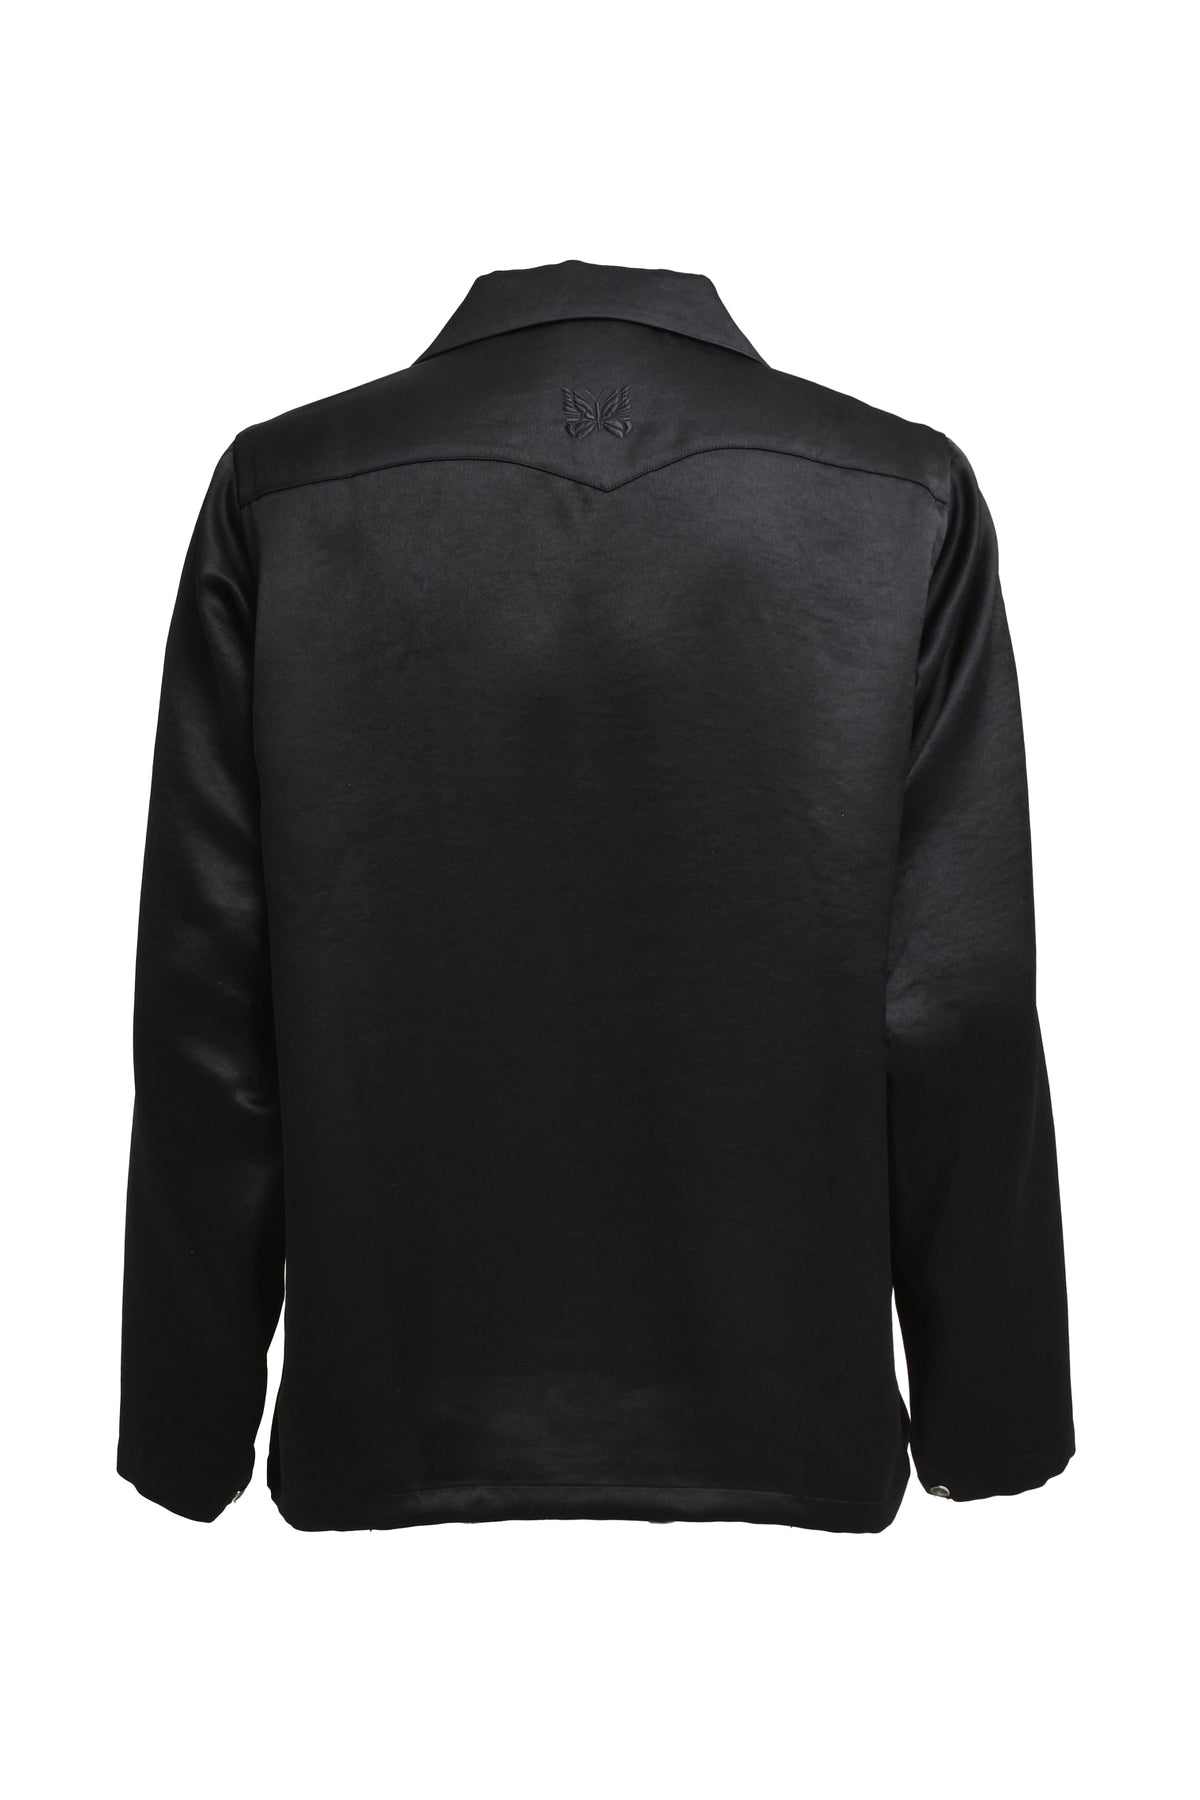 L/S COWBOY ONE-UP SHIRT - POLY SATEEN / BLK